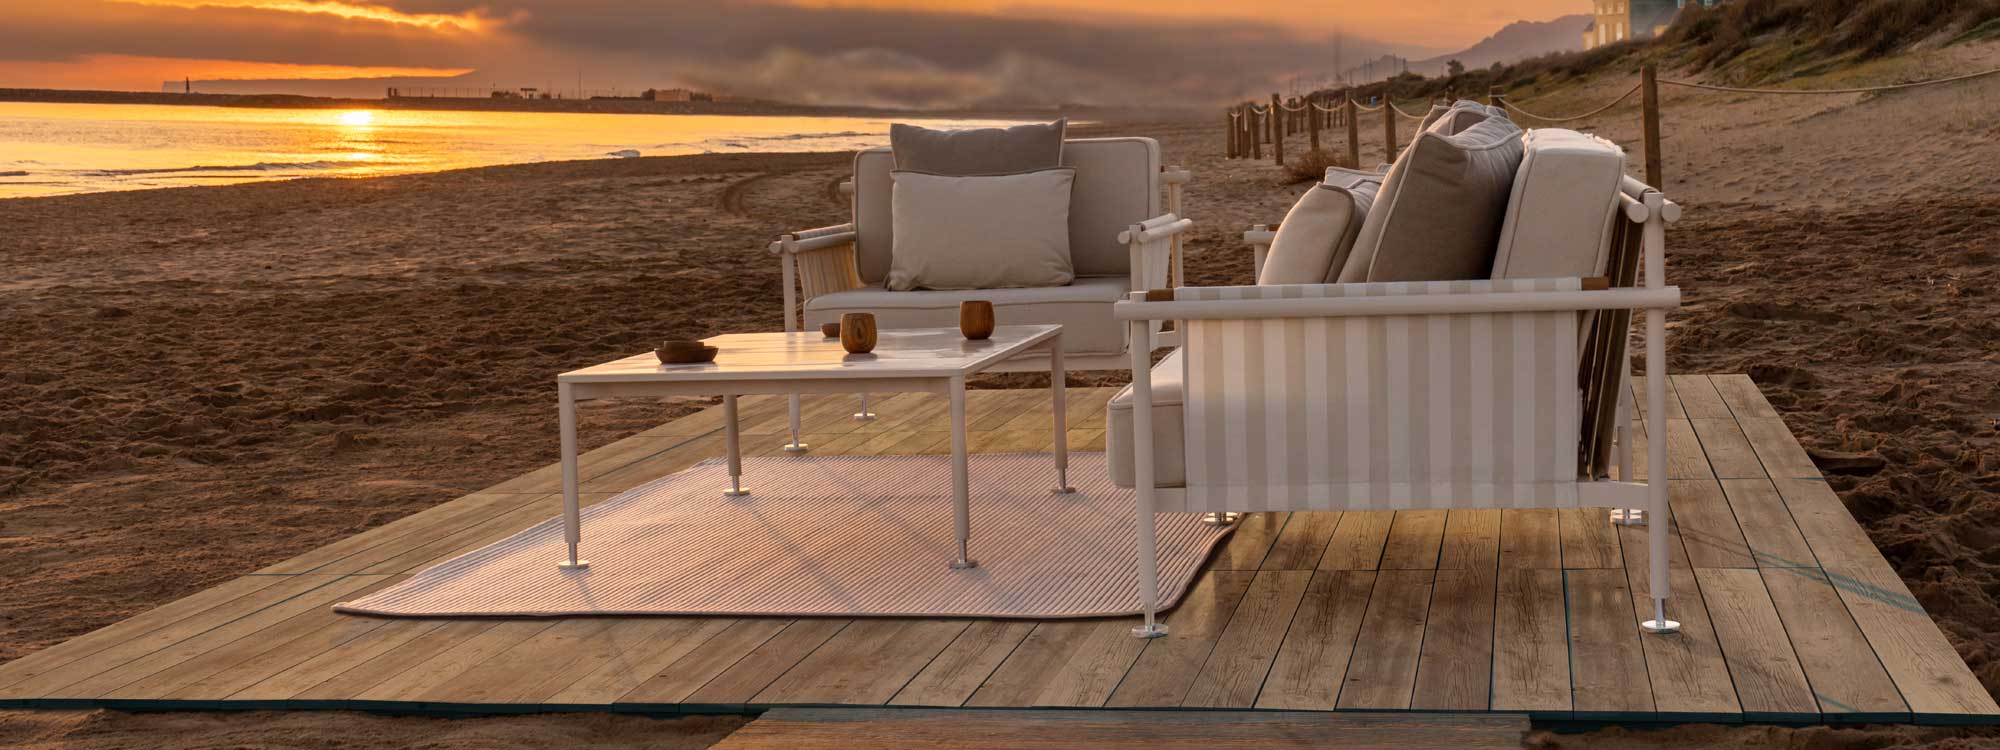 Image of pair of Hamptons exterior lounge chairs by Vondom, on wooden decking on beach at dusk